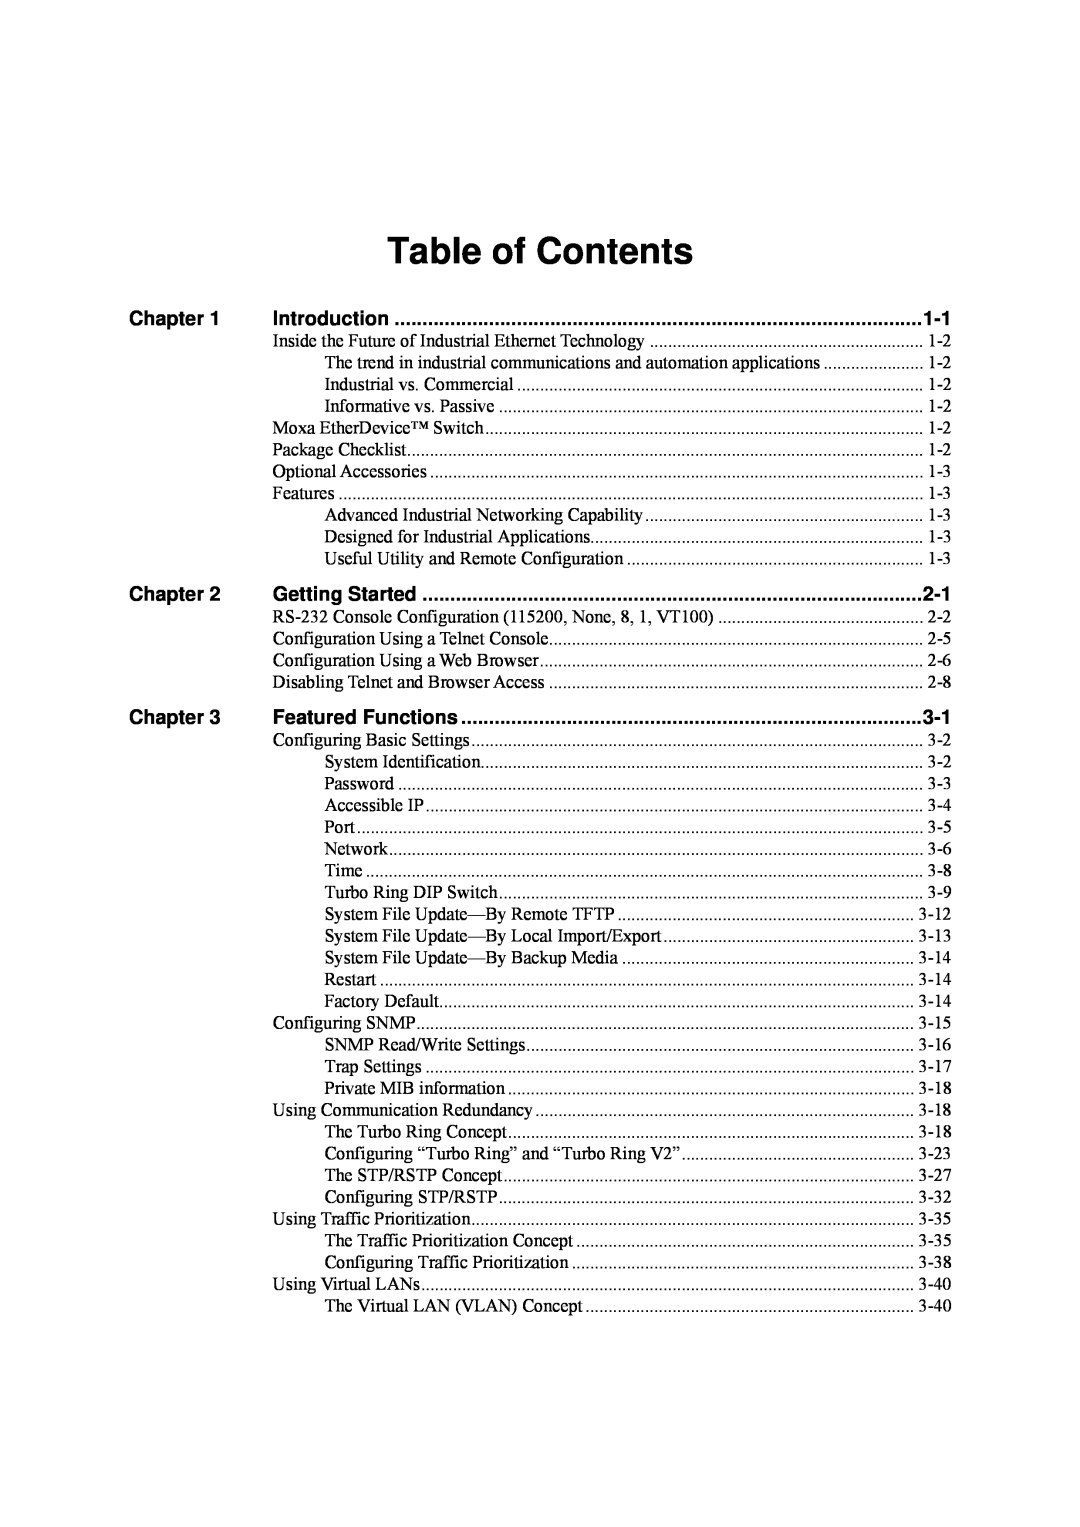 Moxa Technologies EDS-405A, EDS-408A Table of Contents, Chapter, Introduction, Getting Started, Featured Functions 